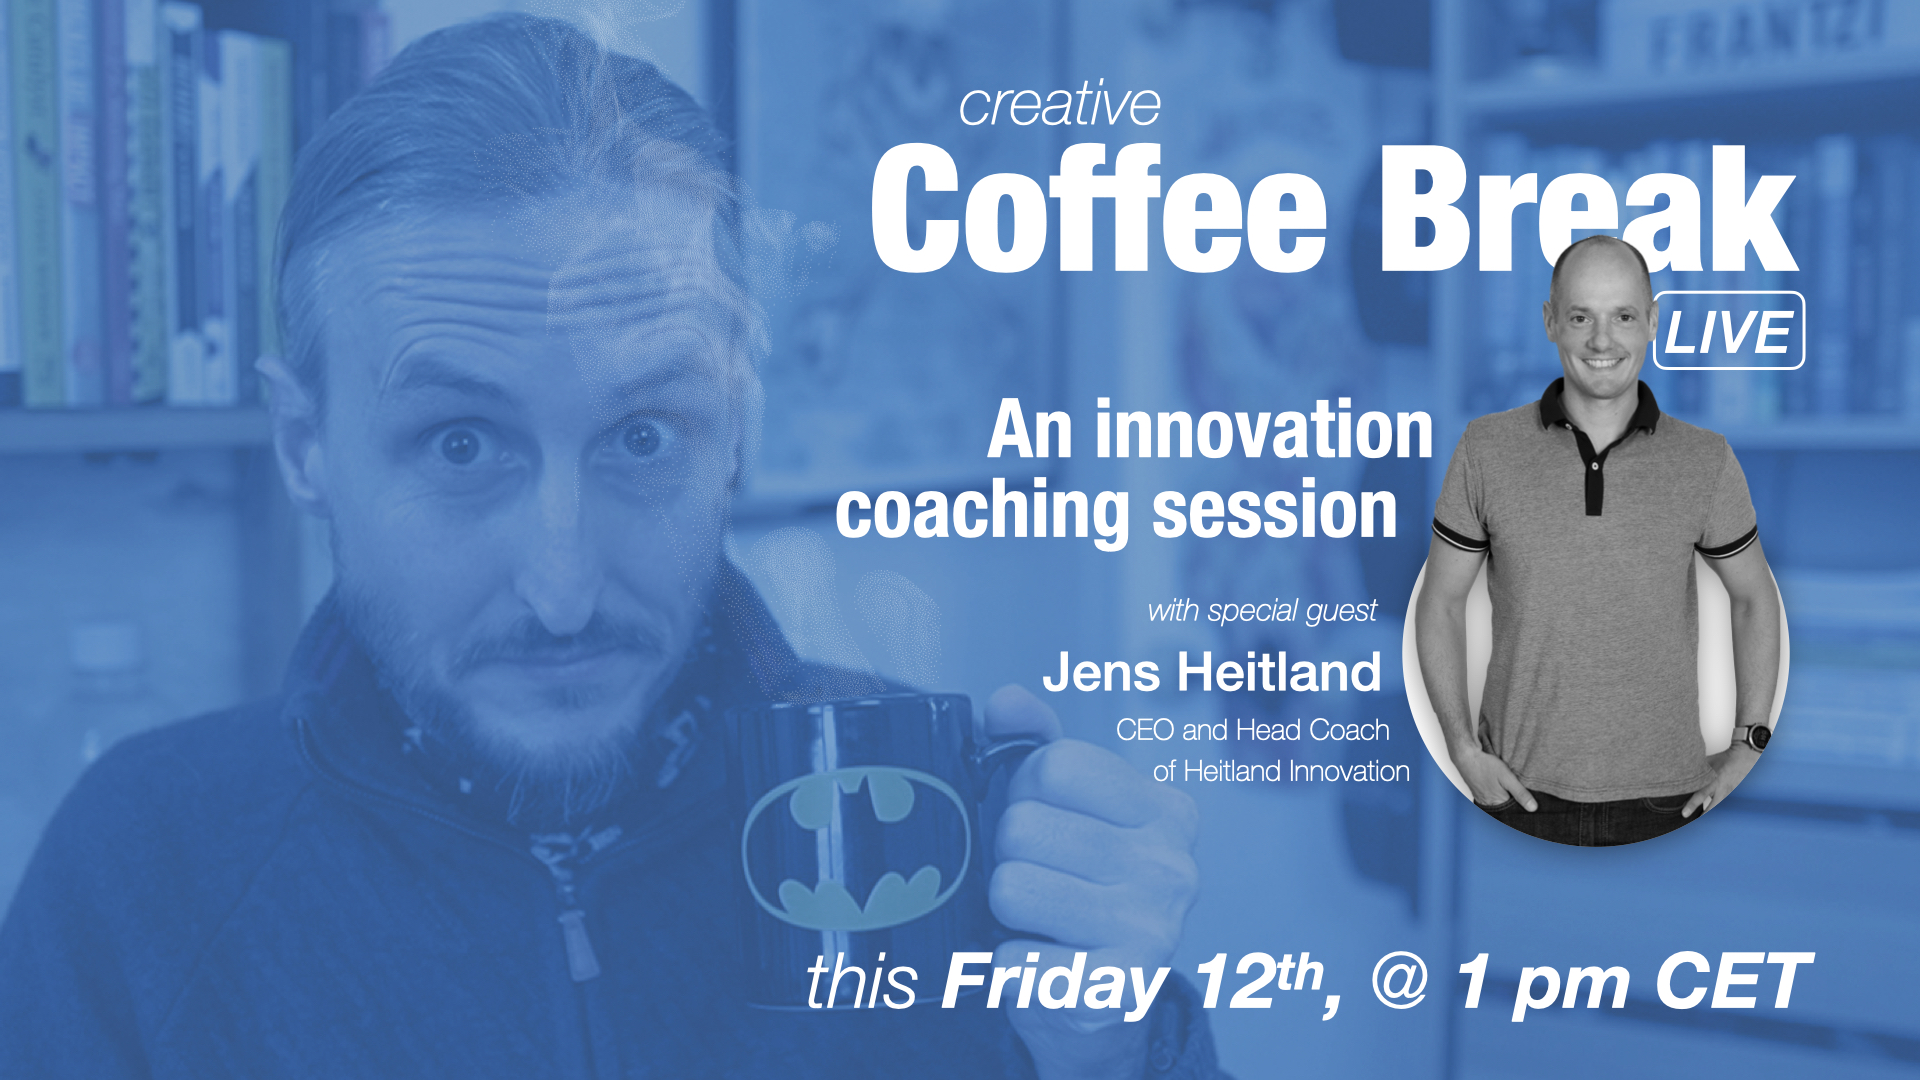 An innovation coaching session, over coffee